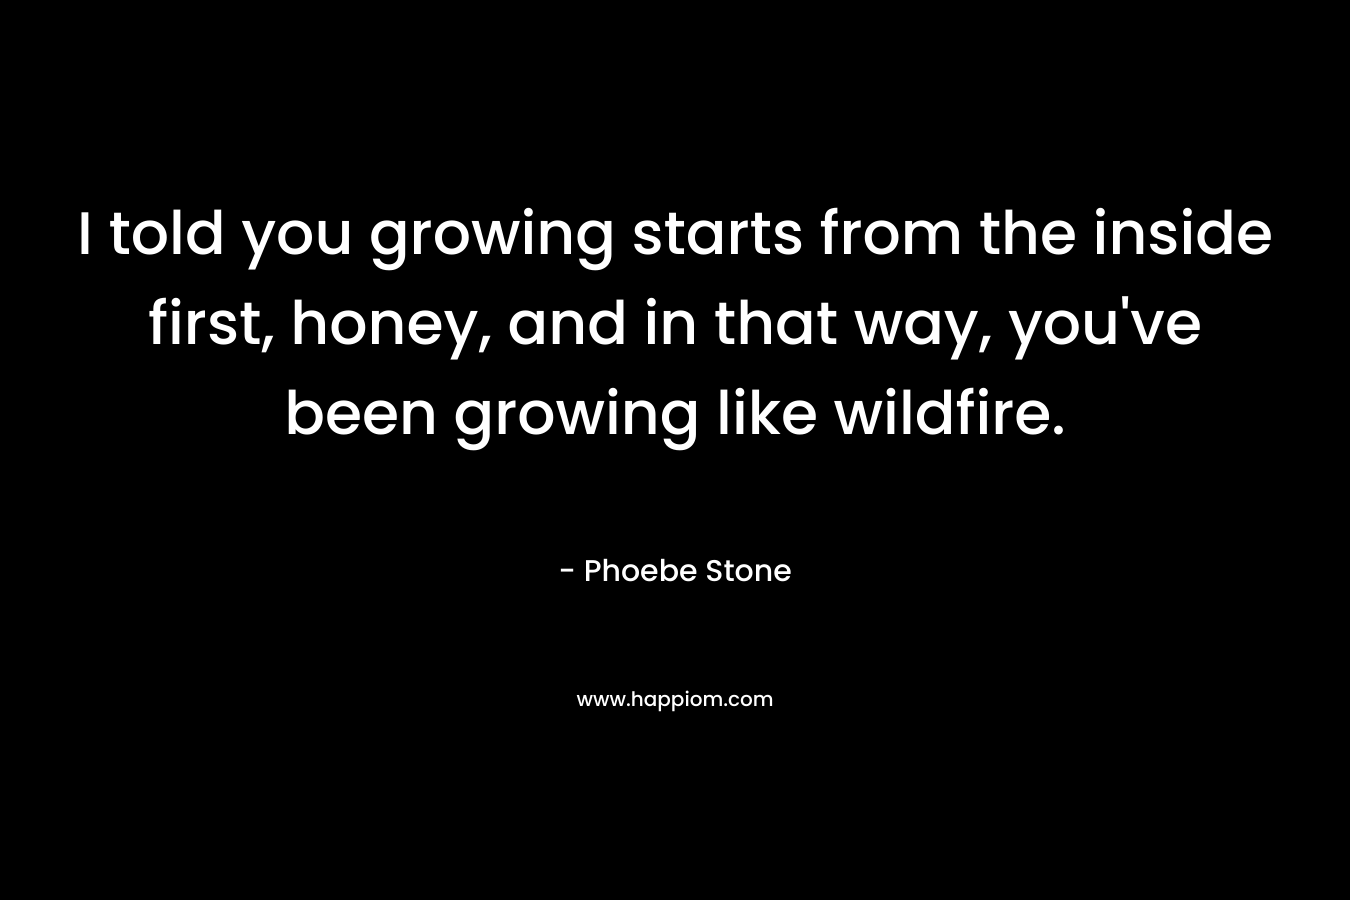 I told you growing starts from the inside first, honey, and in that way, you’ve been growing like wildfire. – Phoebe Stone